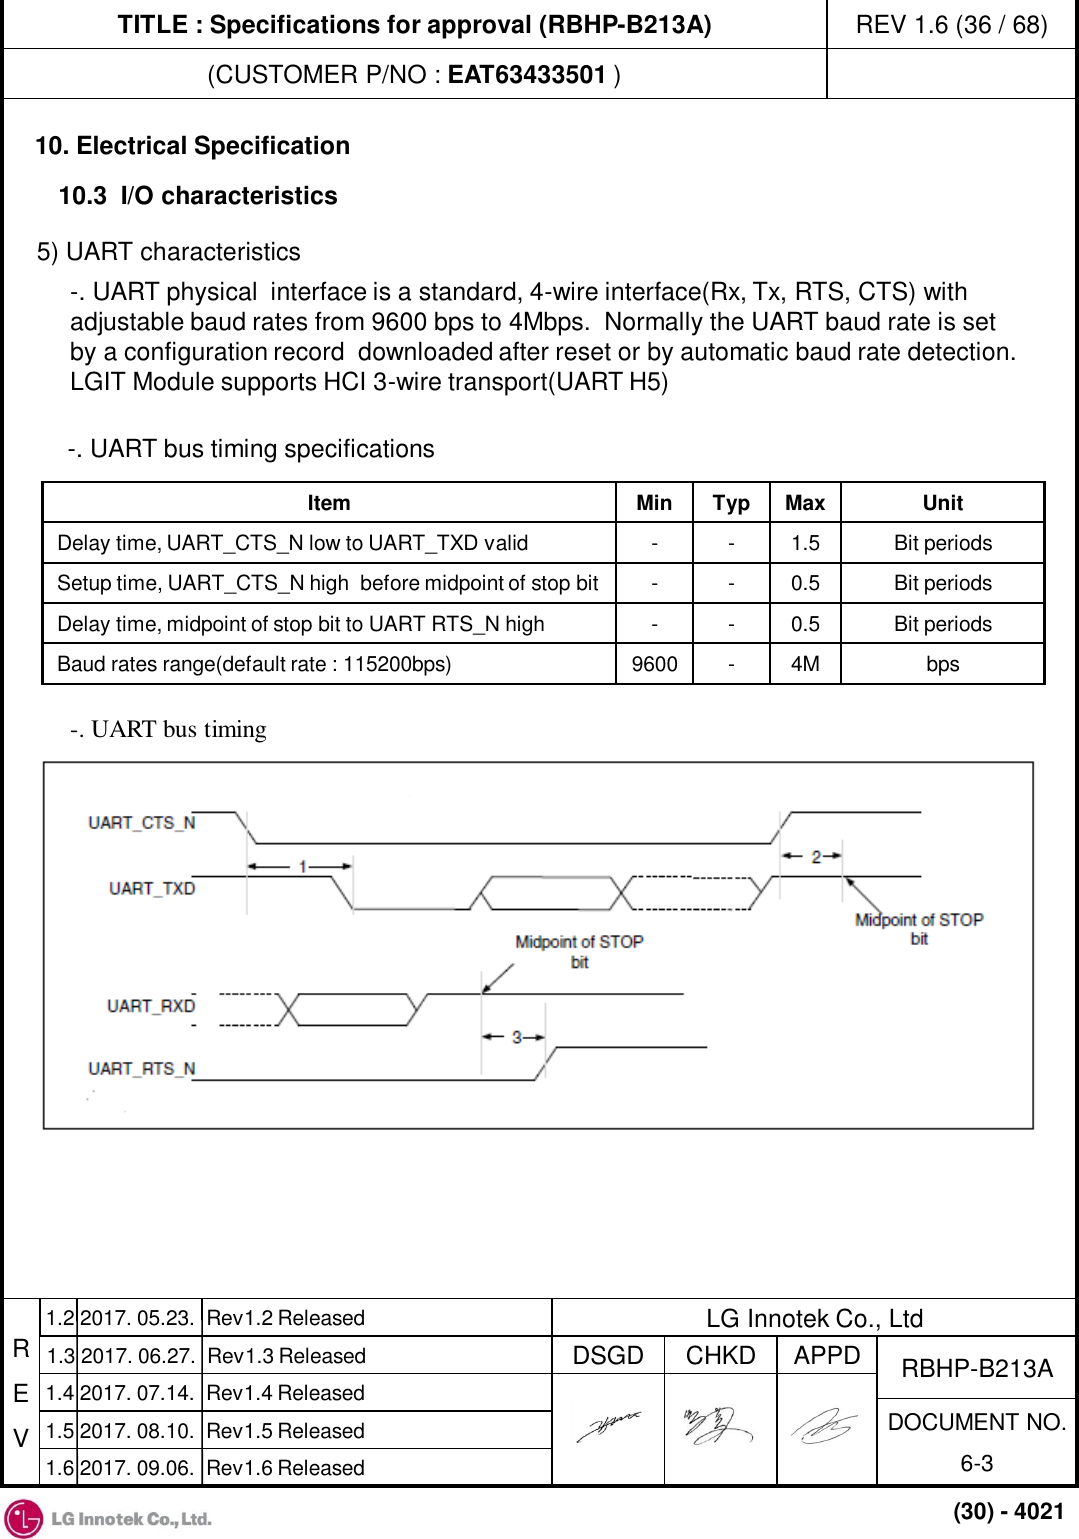 TITLE : Specifications for approval (RBHP-B213A) (CUSTOMER P/NO : EAT63433501 ) REV 1.6 (36 / 68) R E V APPD CHKD DSGD DOCUMENT NO. 6-3 RBHP-B213A LG Innotek Co., Ltd 1.4 2017. 07.14.  Rev1.4 Released 1.5 2017. 08.10.  Rev1.5 Released (30) - 4021 1.2 2017. 05.23.  Rev1.2 Released 1.3 2017. 06.27.  Rev1.3 Released 1.6 2017. 09.06.  Rev1.6 Released 10. Electrical Specification 10.3  I/O characteristics  5) UART characteristics  -. UART physical  interface is a standard, 4-wire interface(Rx, Tx, RTS, CTS) with adjustable baud rates from 9600 bps to 4Mbps.  Normally the UART baud rate is set  by a configuration record  downloaded after reset or by automatic baud rate detection. LGIT Module supports HCI 3-wire transport(UART H5) Item  Min  Typ  Max  Unit Delay time, UART_CTS_N low to UART_TXD valid  -  -  1.5  Bit periods Setup time, UART_CTS_N high  before midpoint of stop bit  -  -  0.5  Bit periods Delay time, midpoint of stop bit to UART RTS_N high  -  -  0.5  Bit periods Baud rates range(default rate : 115200bps)  9600  -  4M bps -. UART bus timing specifications -. UART bus timing 